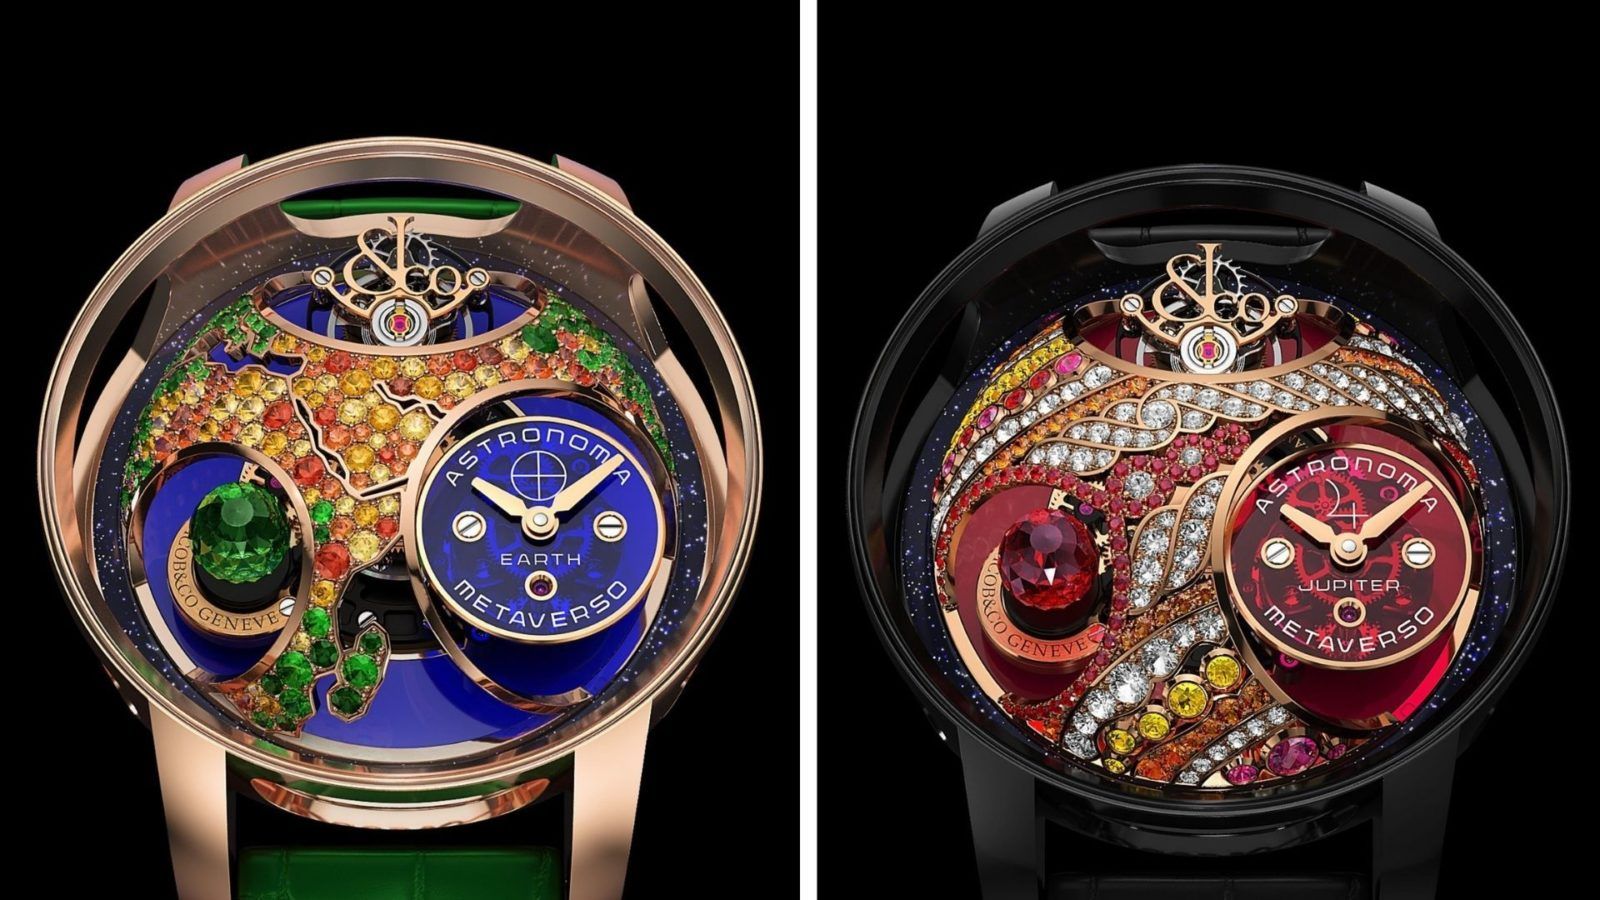 Jacob & Co. enters the metaverse with exquisite ‘Astronomia Metaverso’ NFT collection